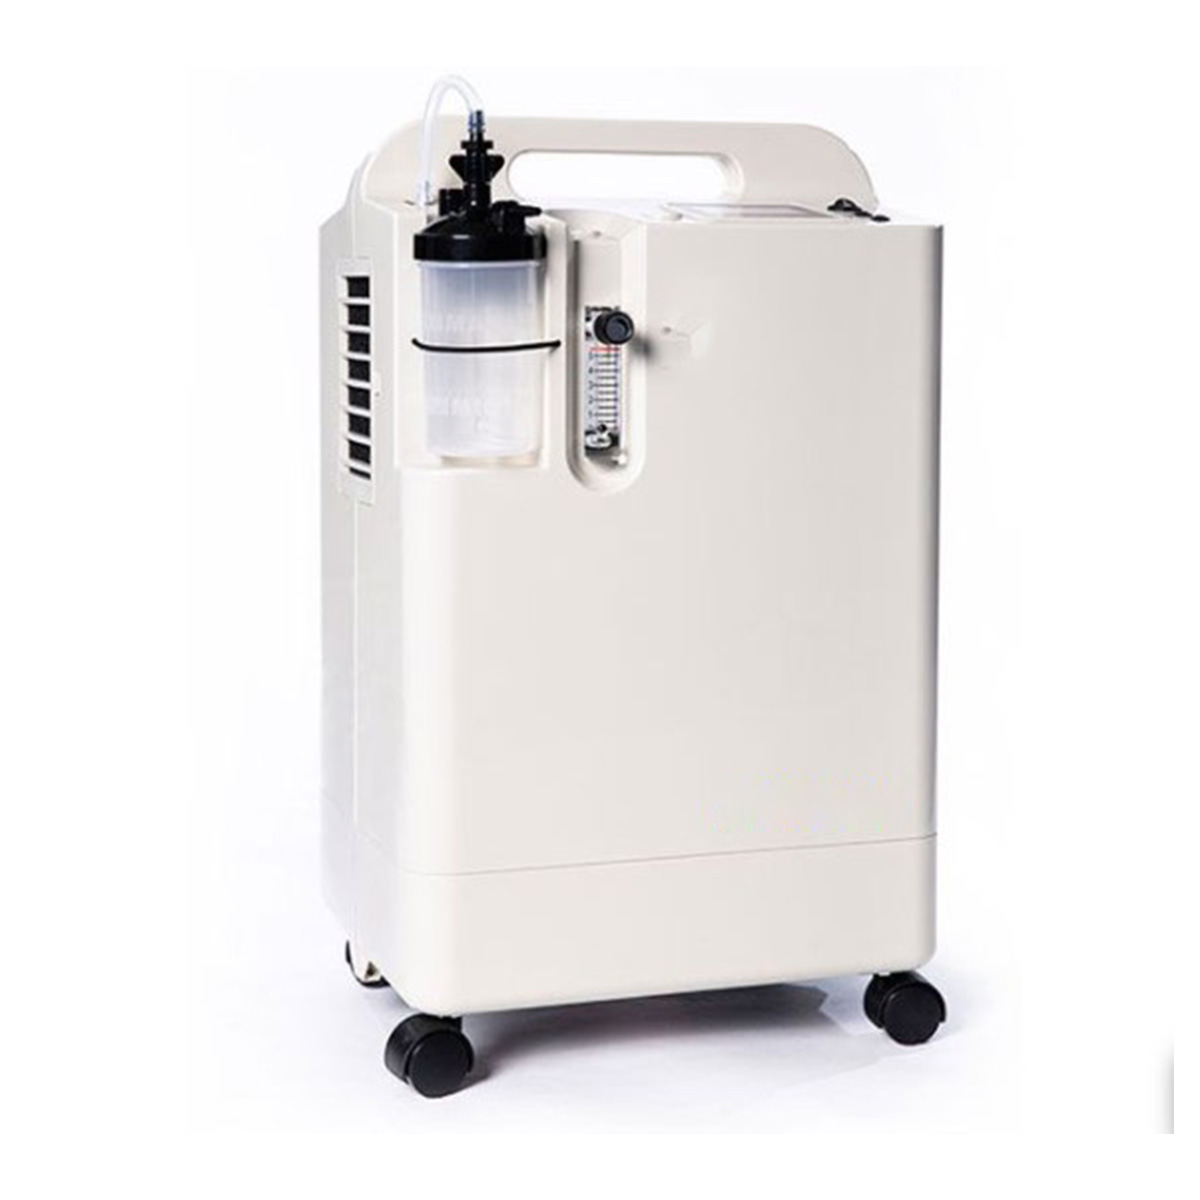 5 Longfian Oxygen Concentrator On Sale Suppliers, Service Provider in Chhatarpur